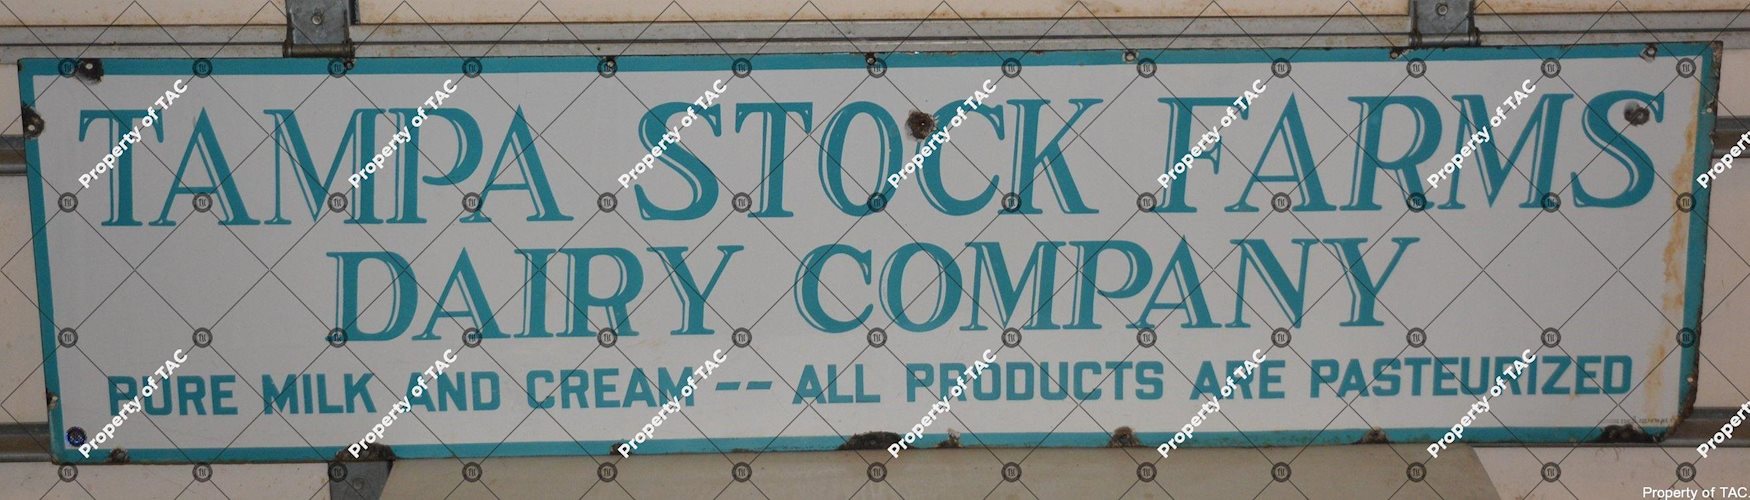 Tampa Stock Farms Dairy Company Pure Milk and Cream All Products are Pasteurized" Sign"